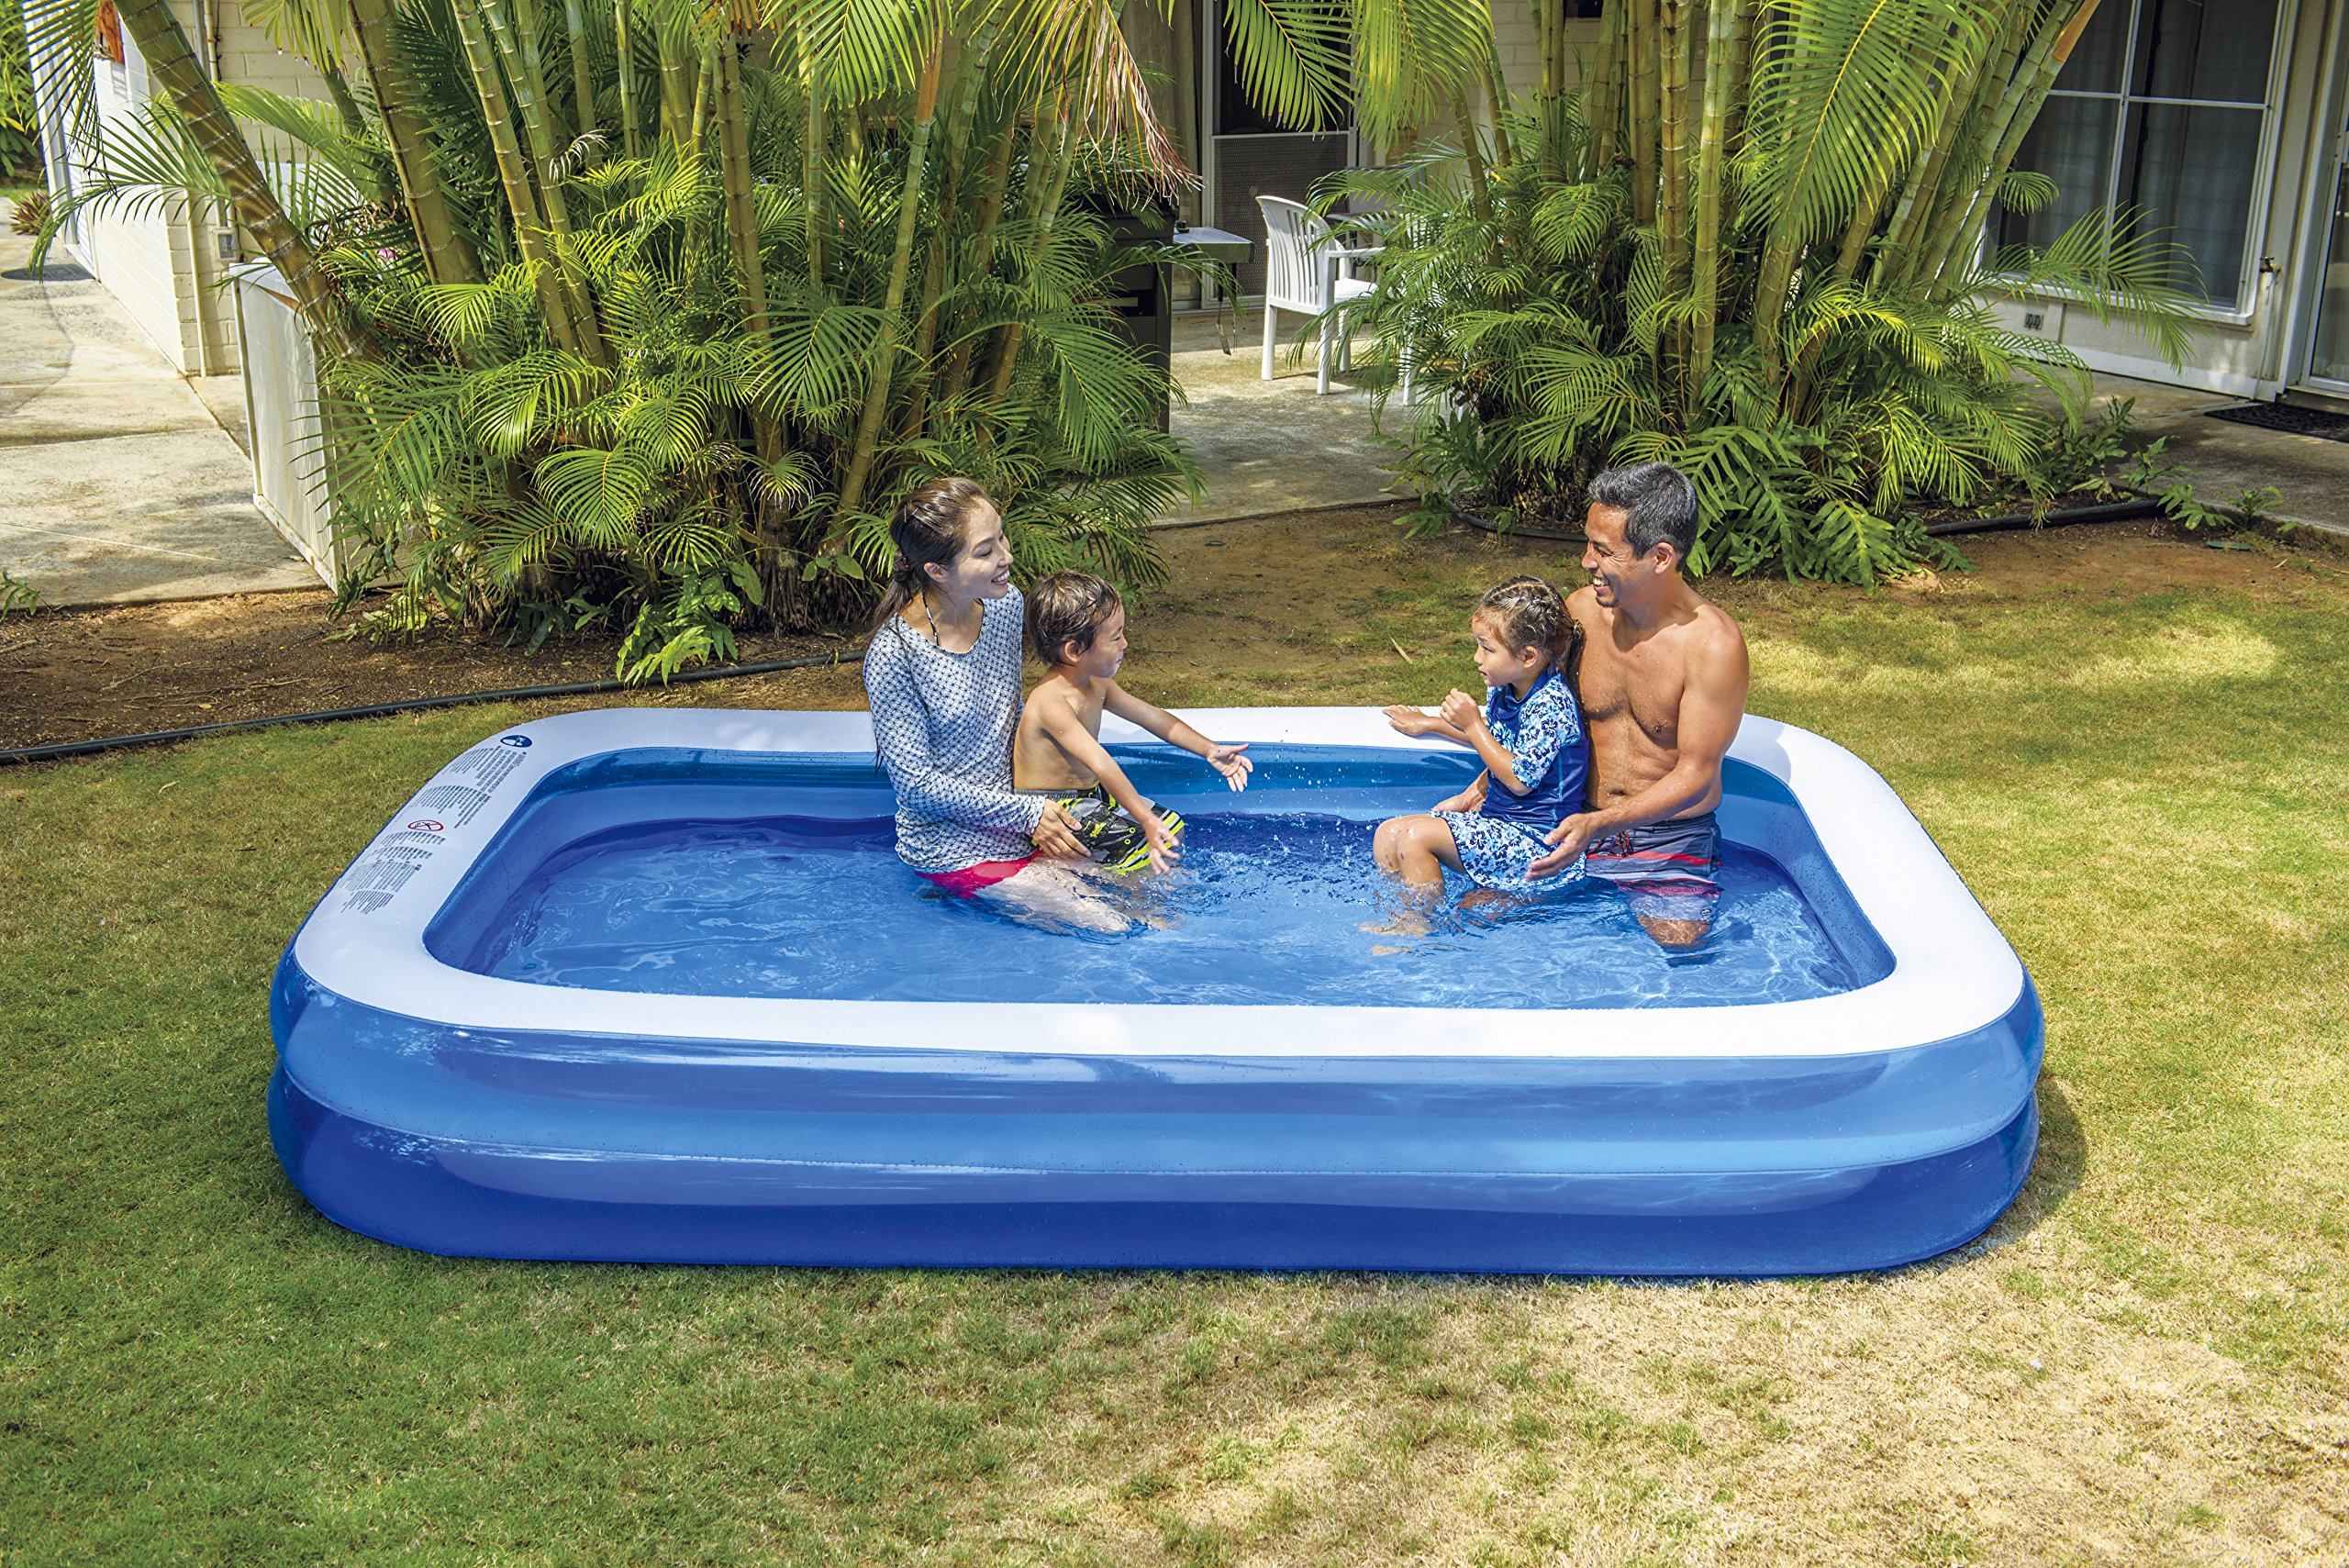 The Benefits of Owning an Inflatable Pool